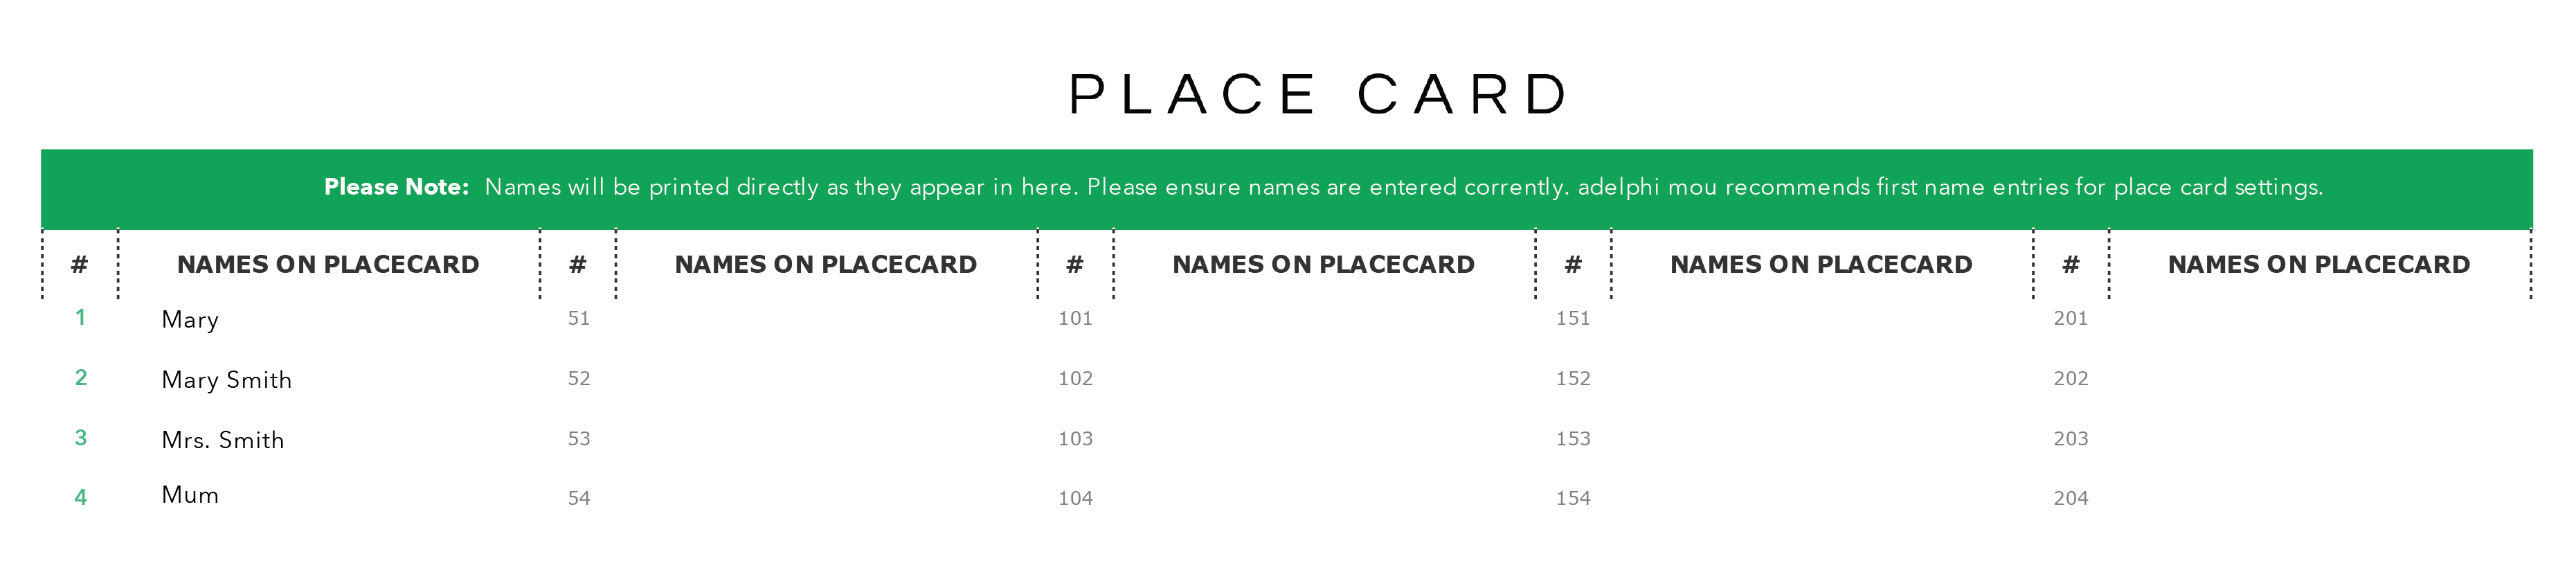 Place card template example